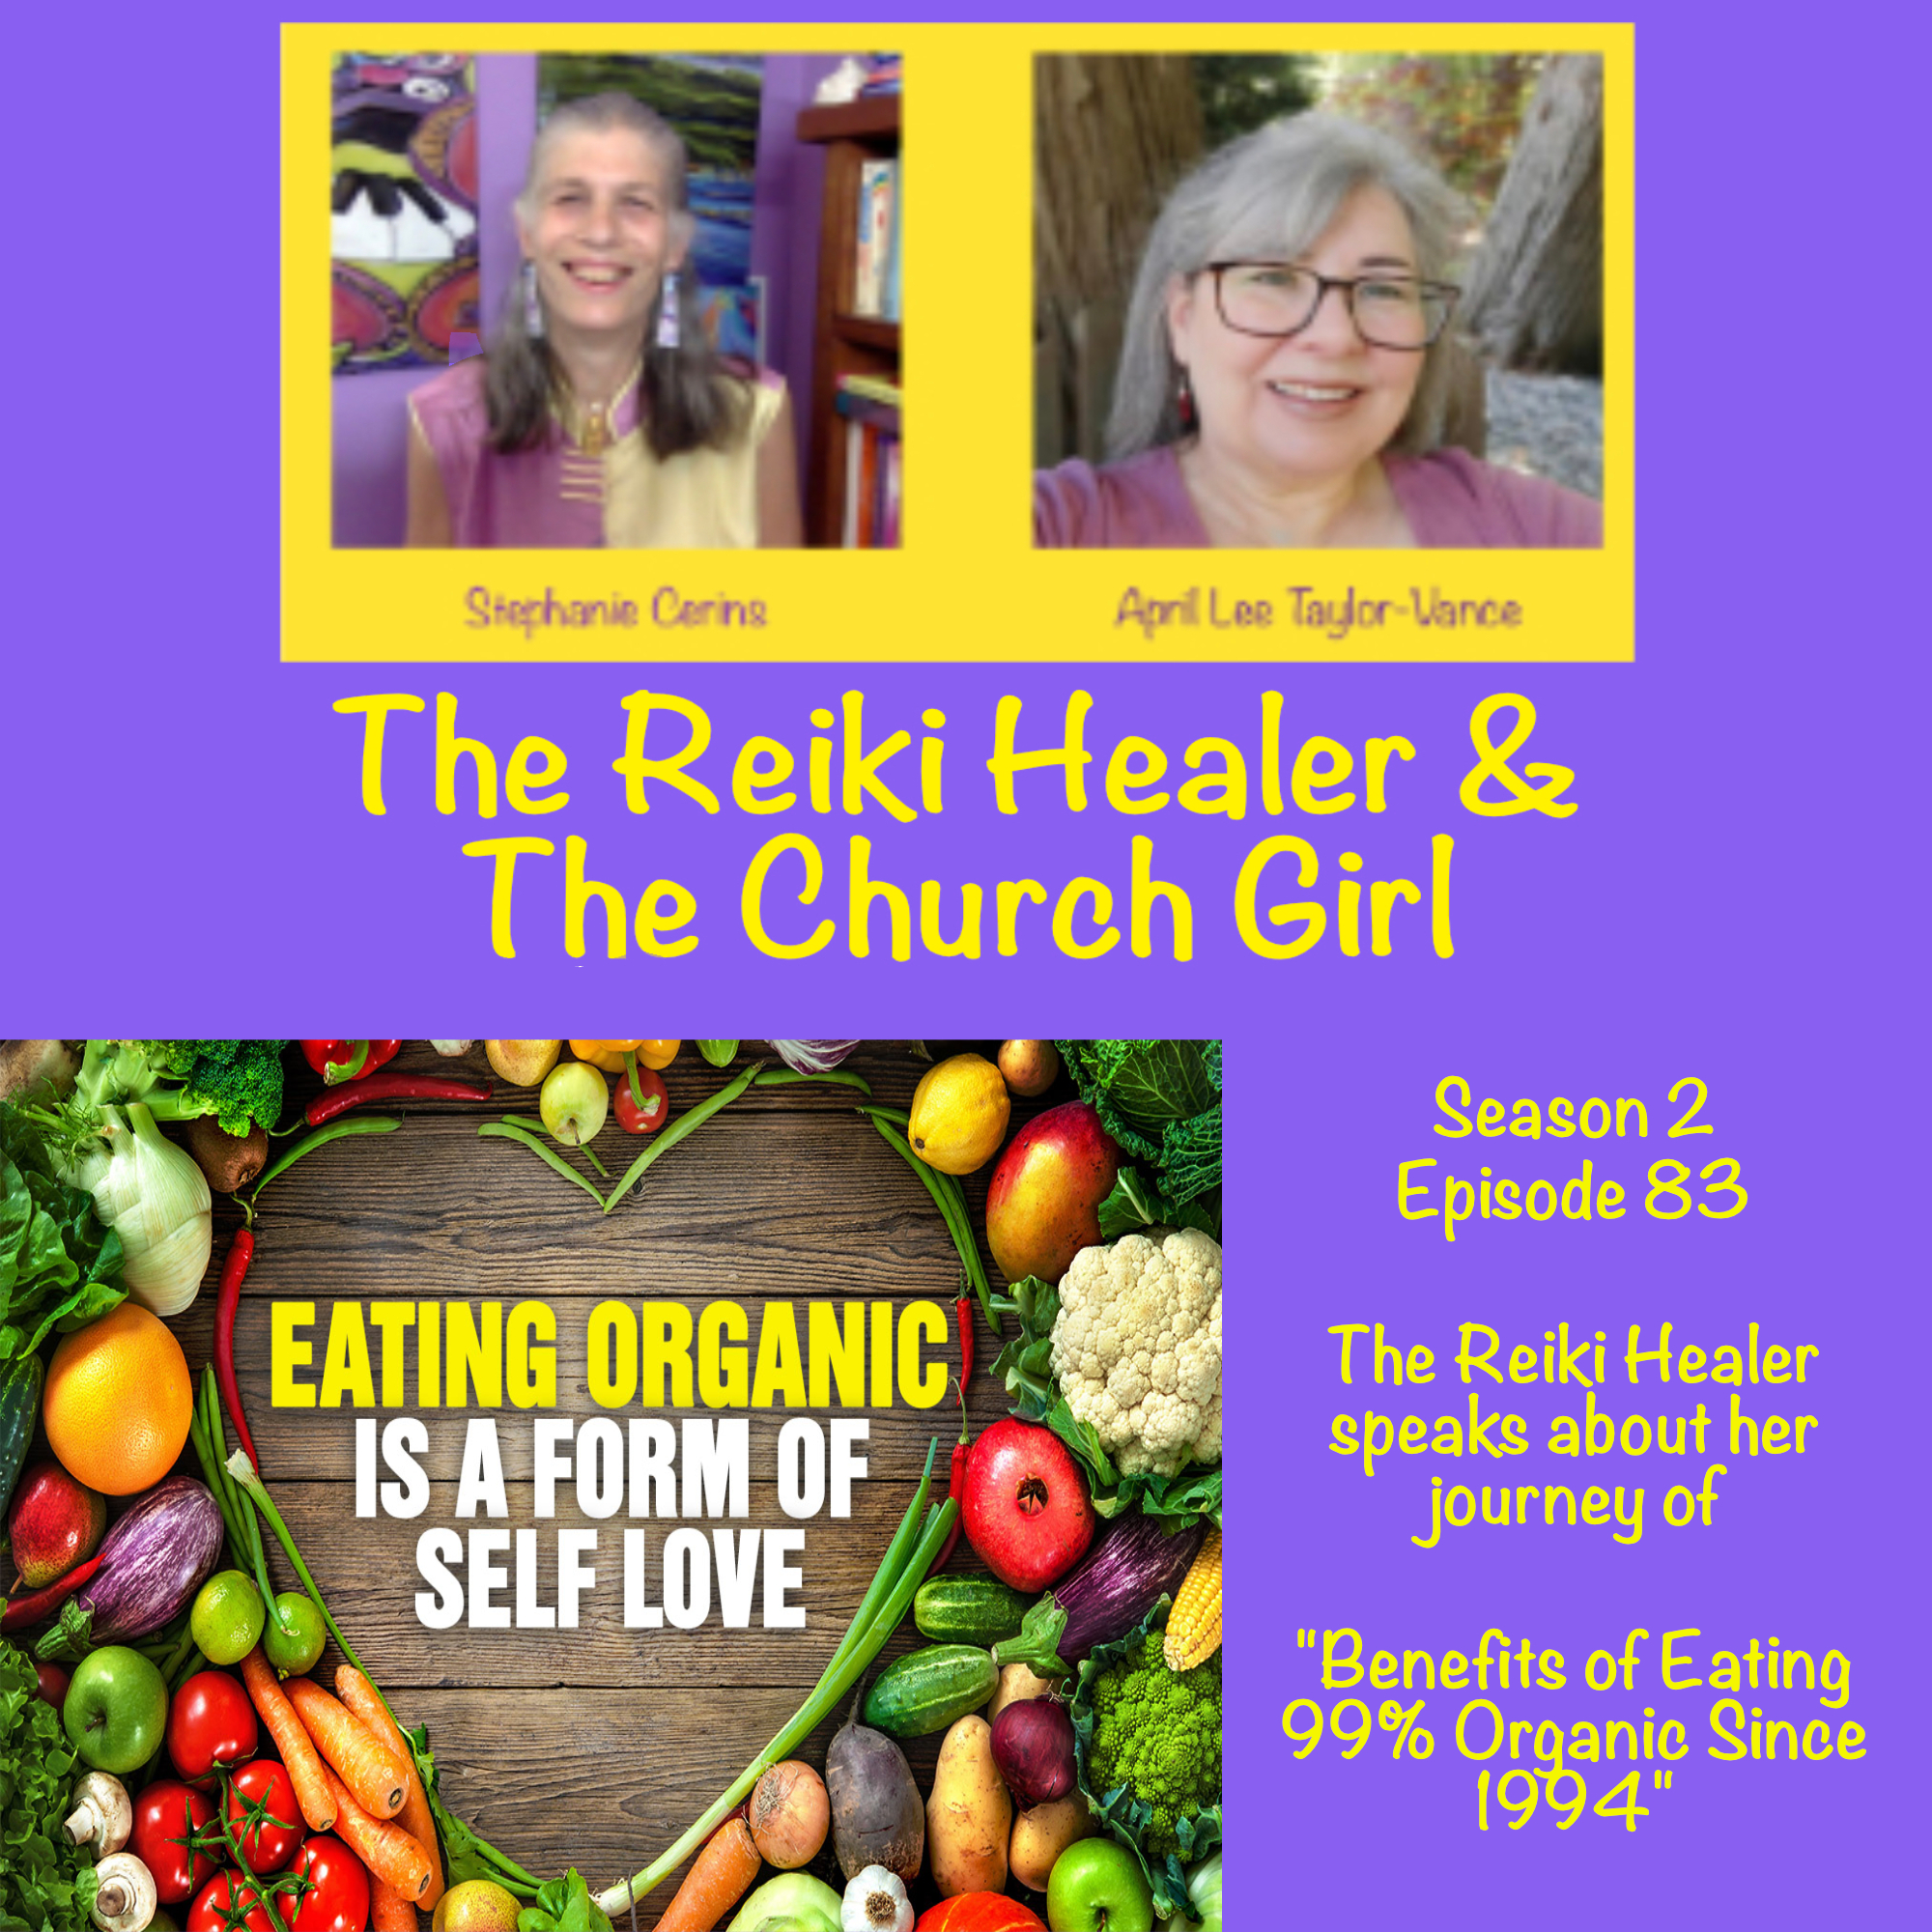 Season 2 Episode 83 The Reiki Healer speaks about her journey of “Benefits of Eating 99% Organic since 1994!”